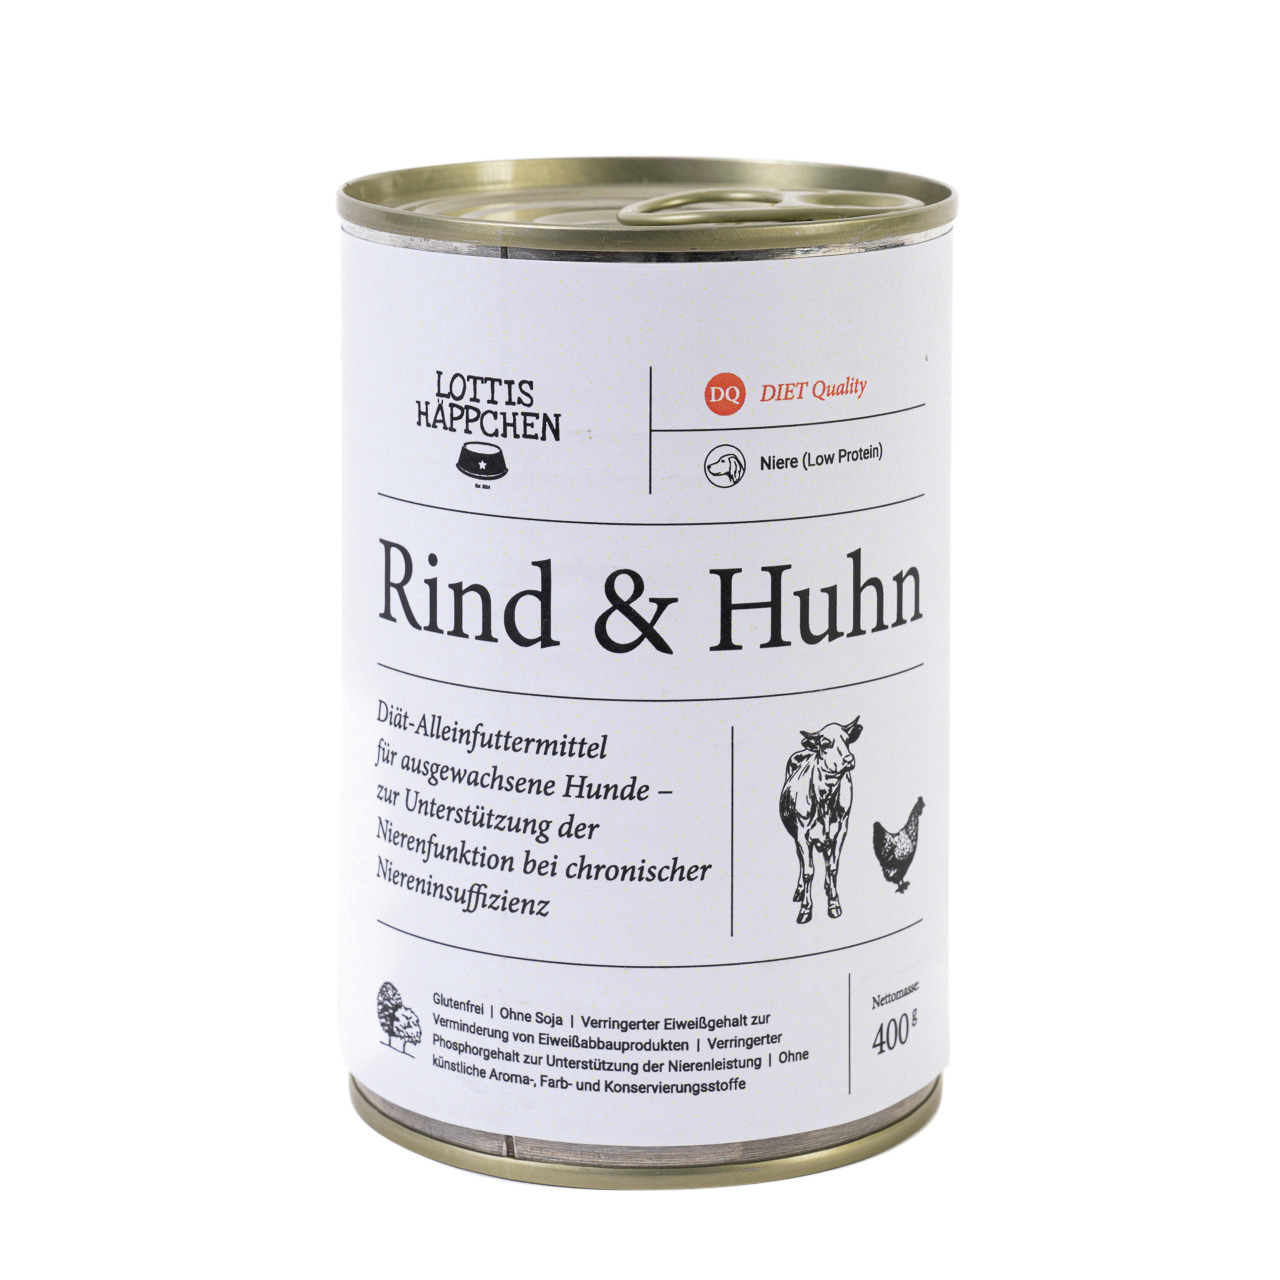 Lottis Häppchen Niere (Low Protein) / Rind & Huhn Hunde Nassfutter 400 g